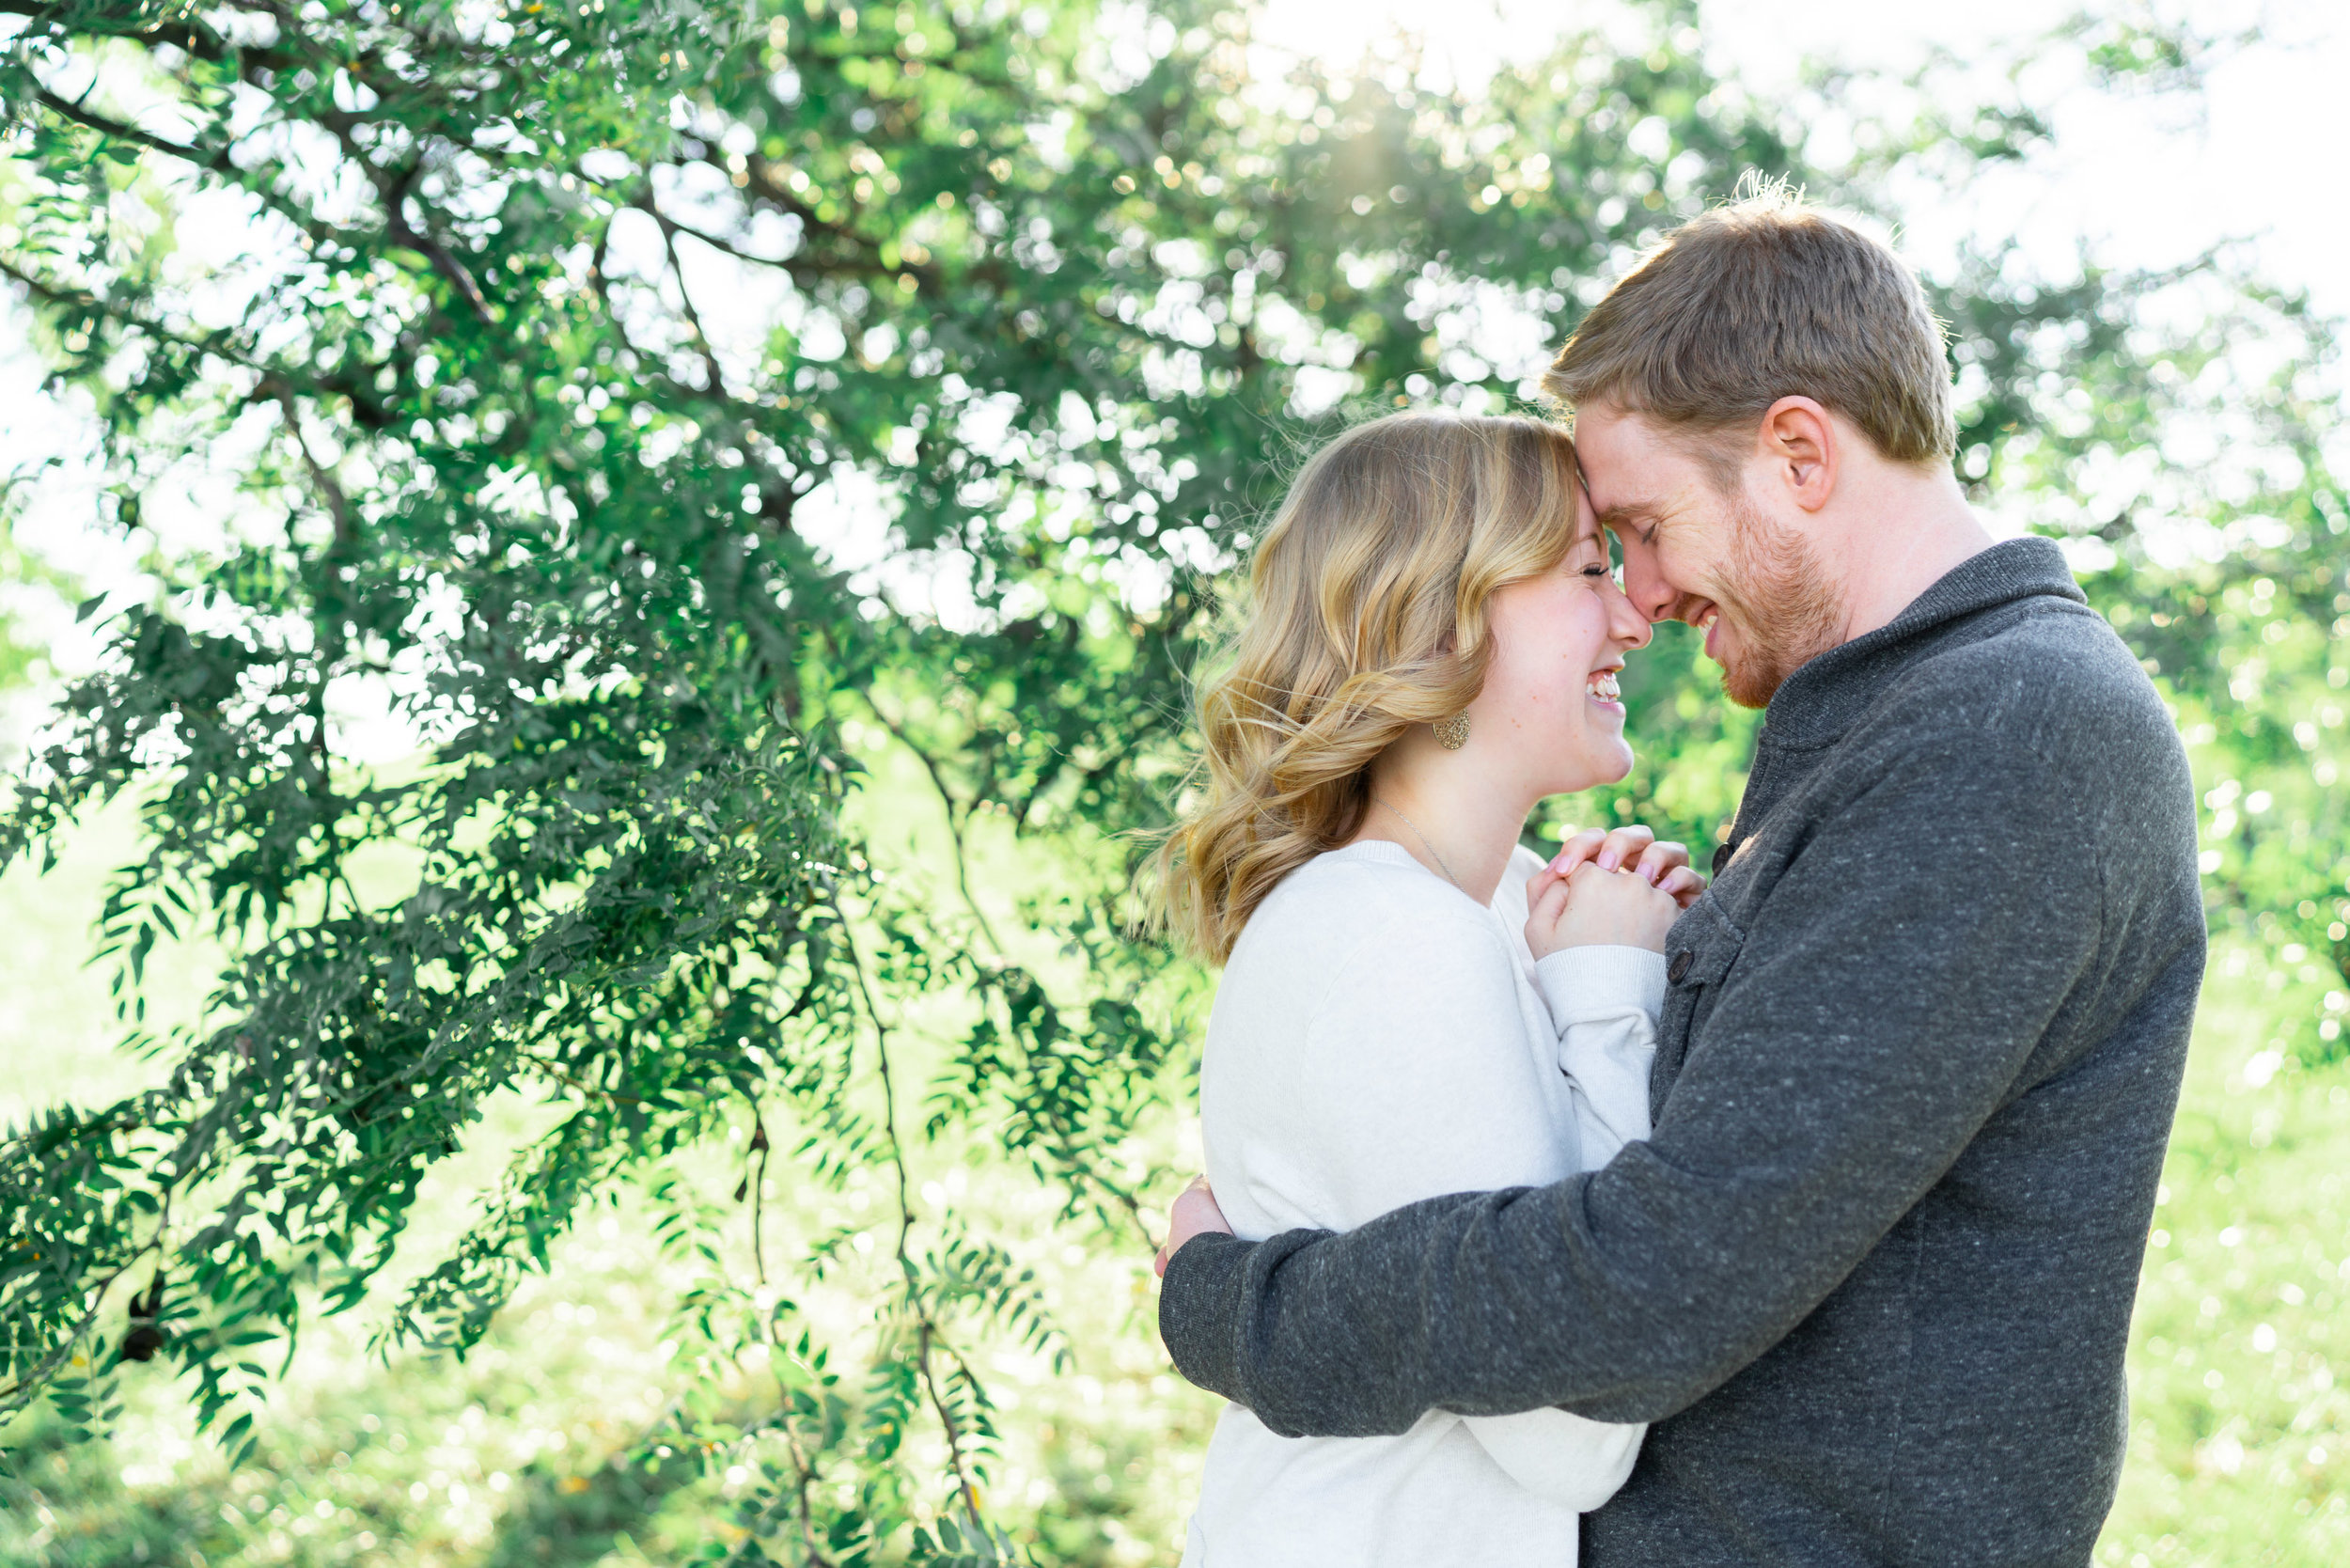 Baltimore Ft McHenry engagement session photos in fall